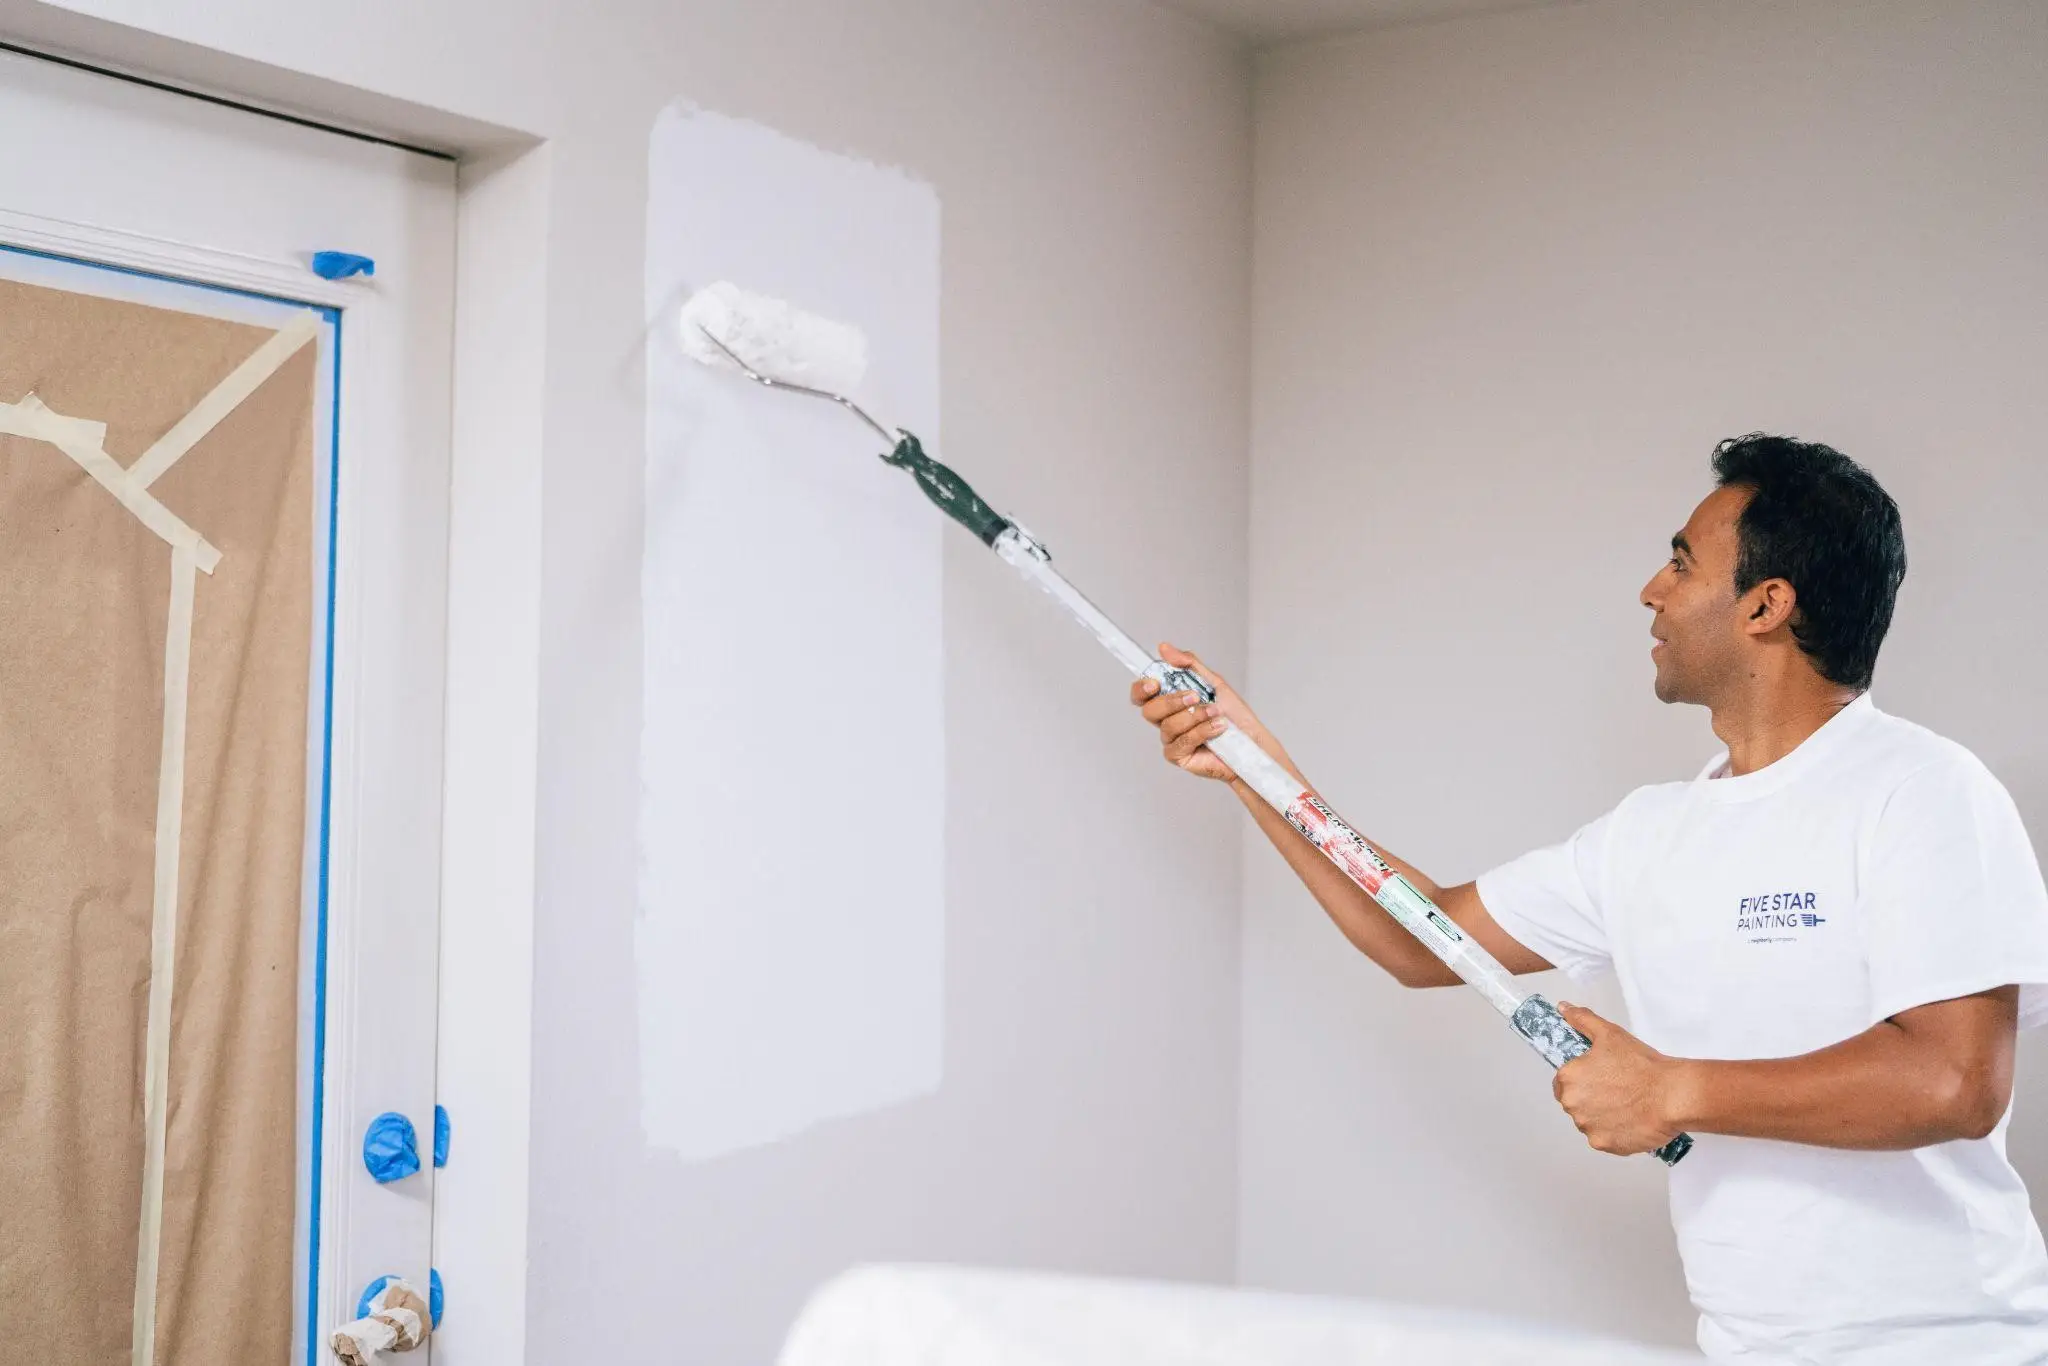 Five Star Painting profession using a roller brush to paint walls with white primer.